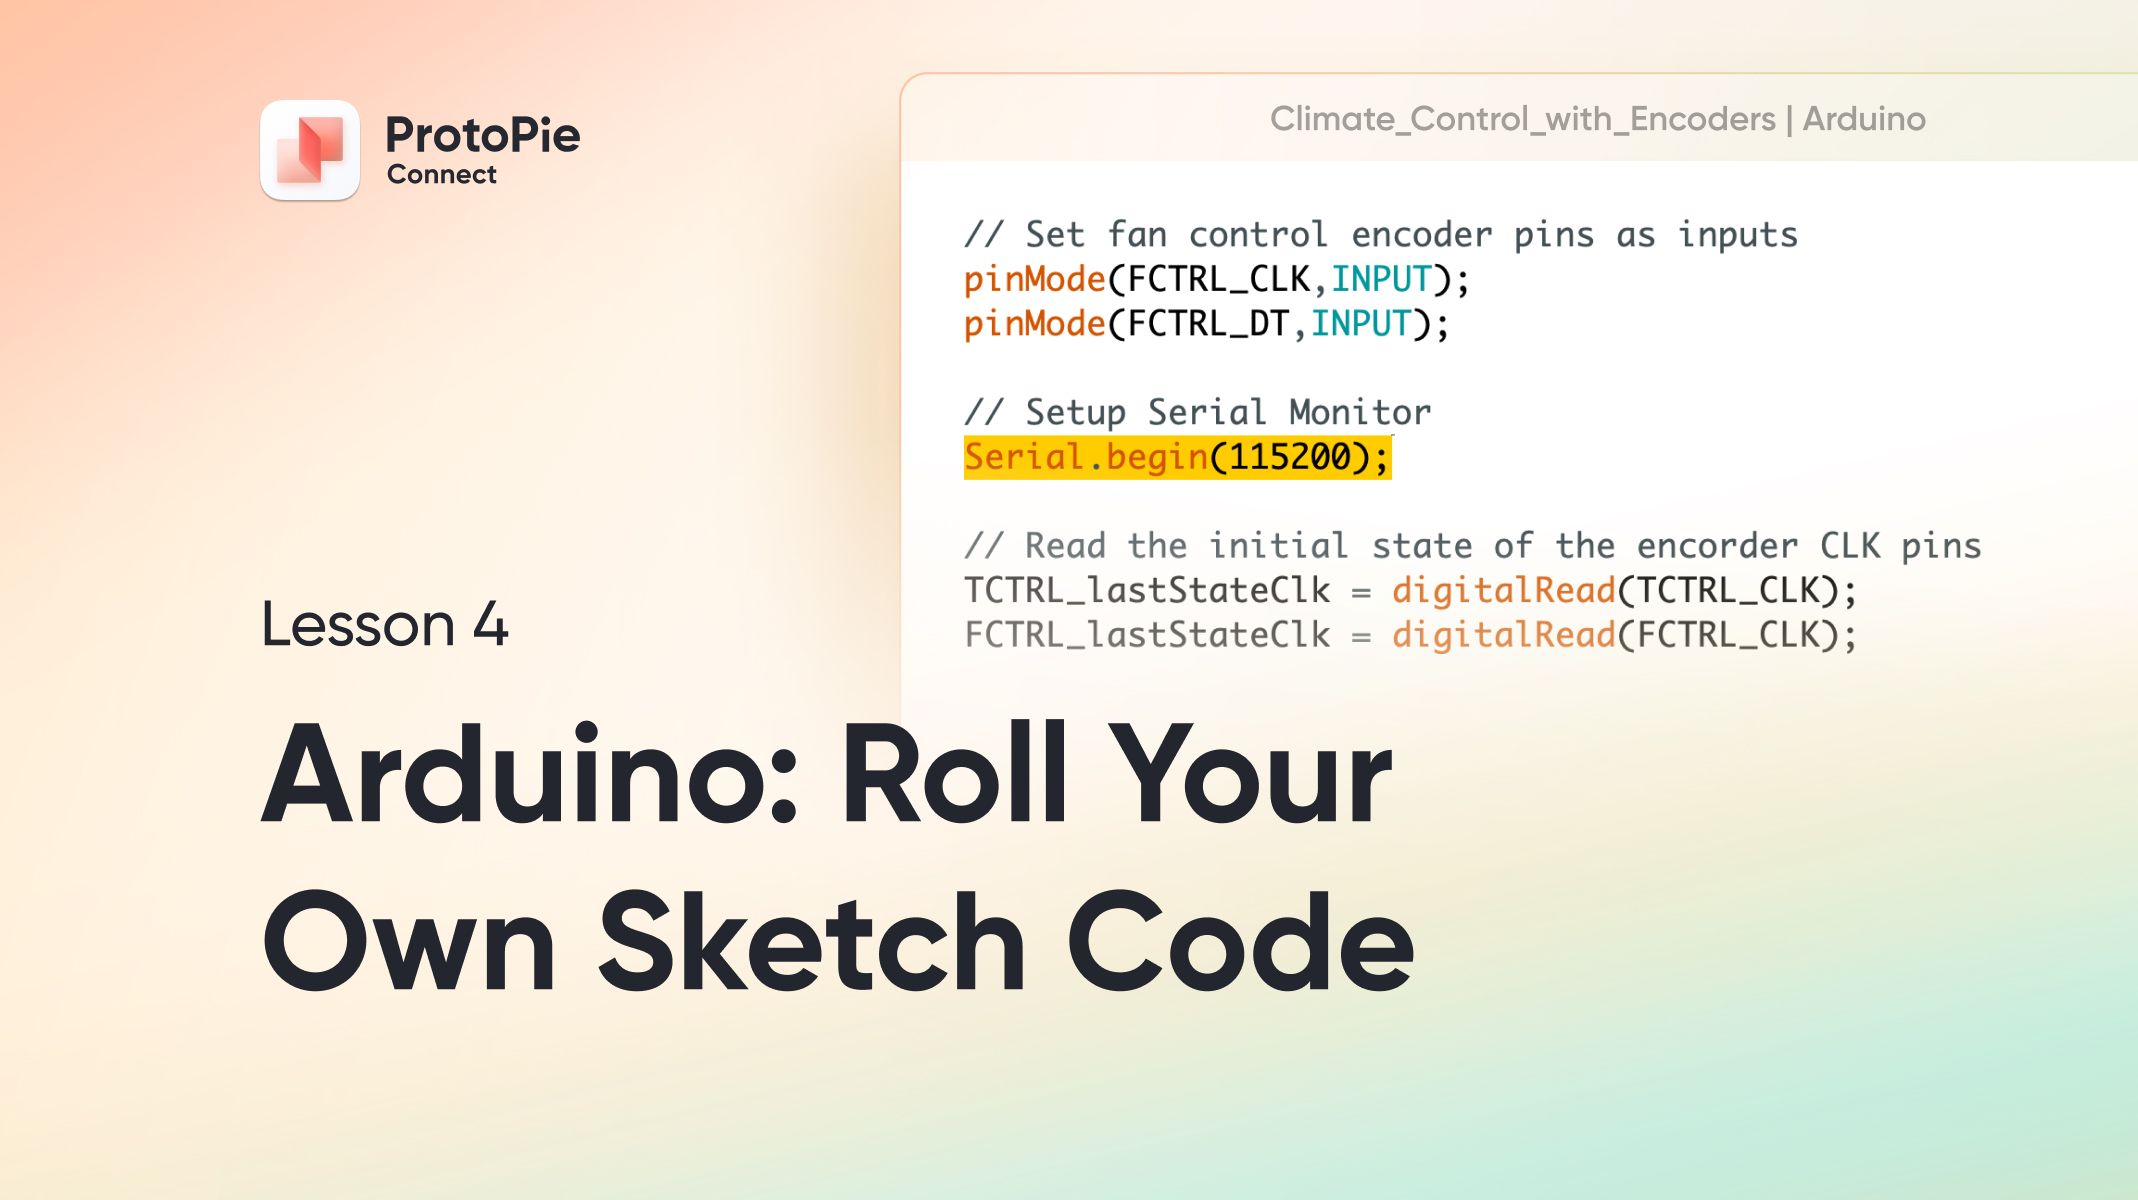 Intro to ProtoPie Connect 4 of 7: Arduino Part 2 - Roll Your Own Sketch Code